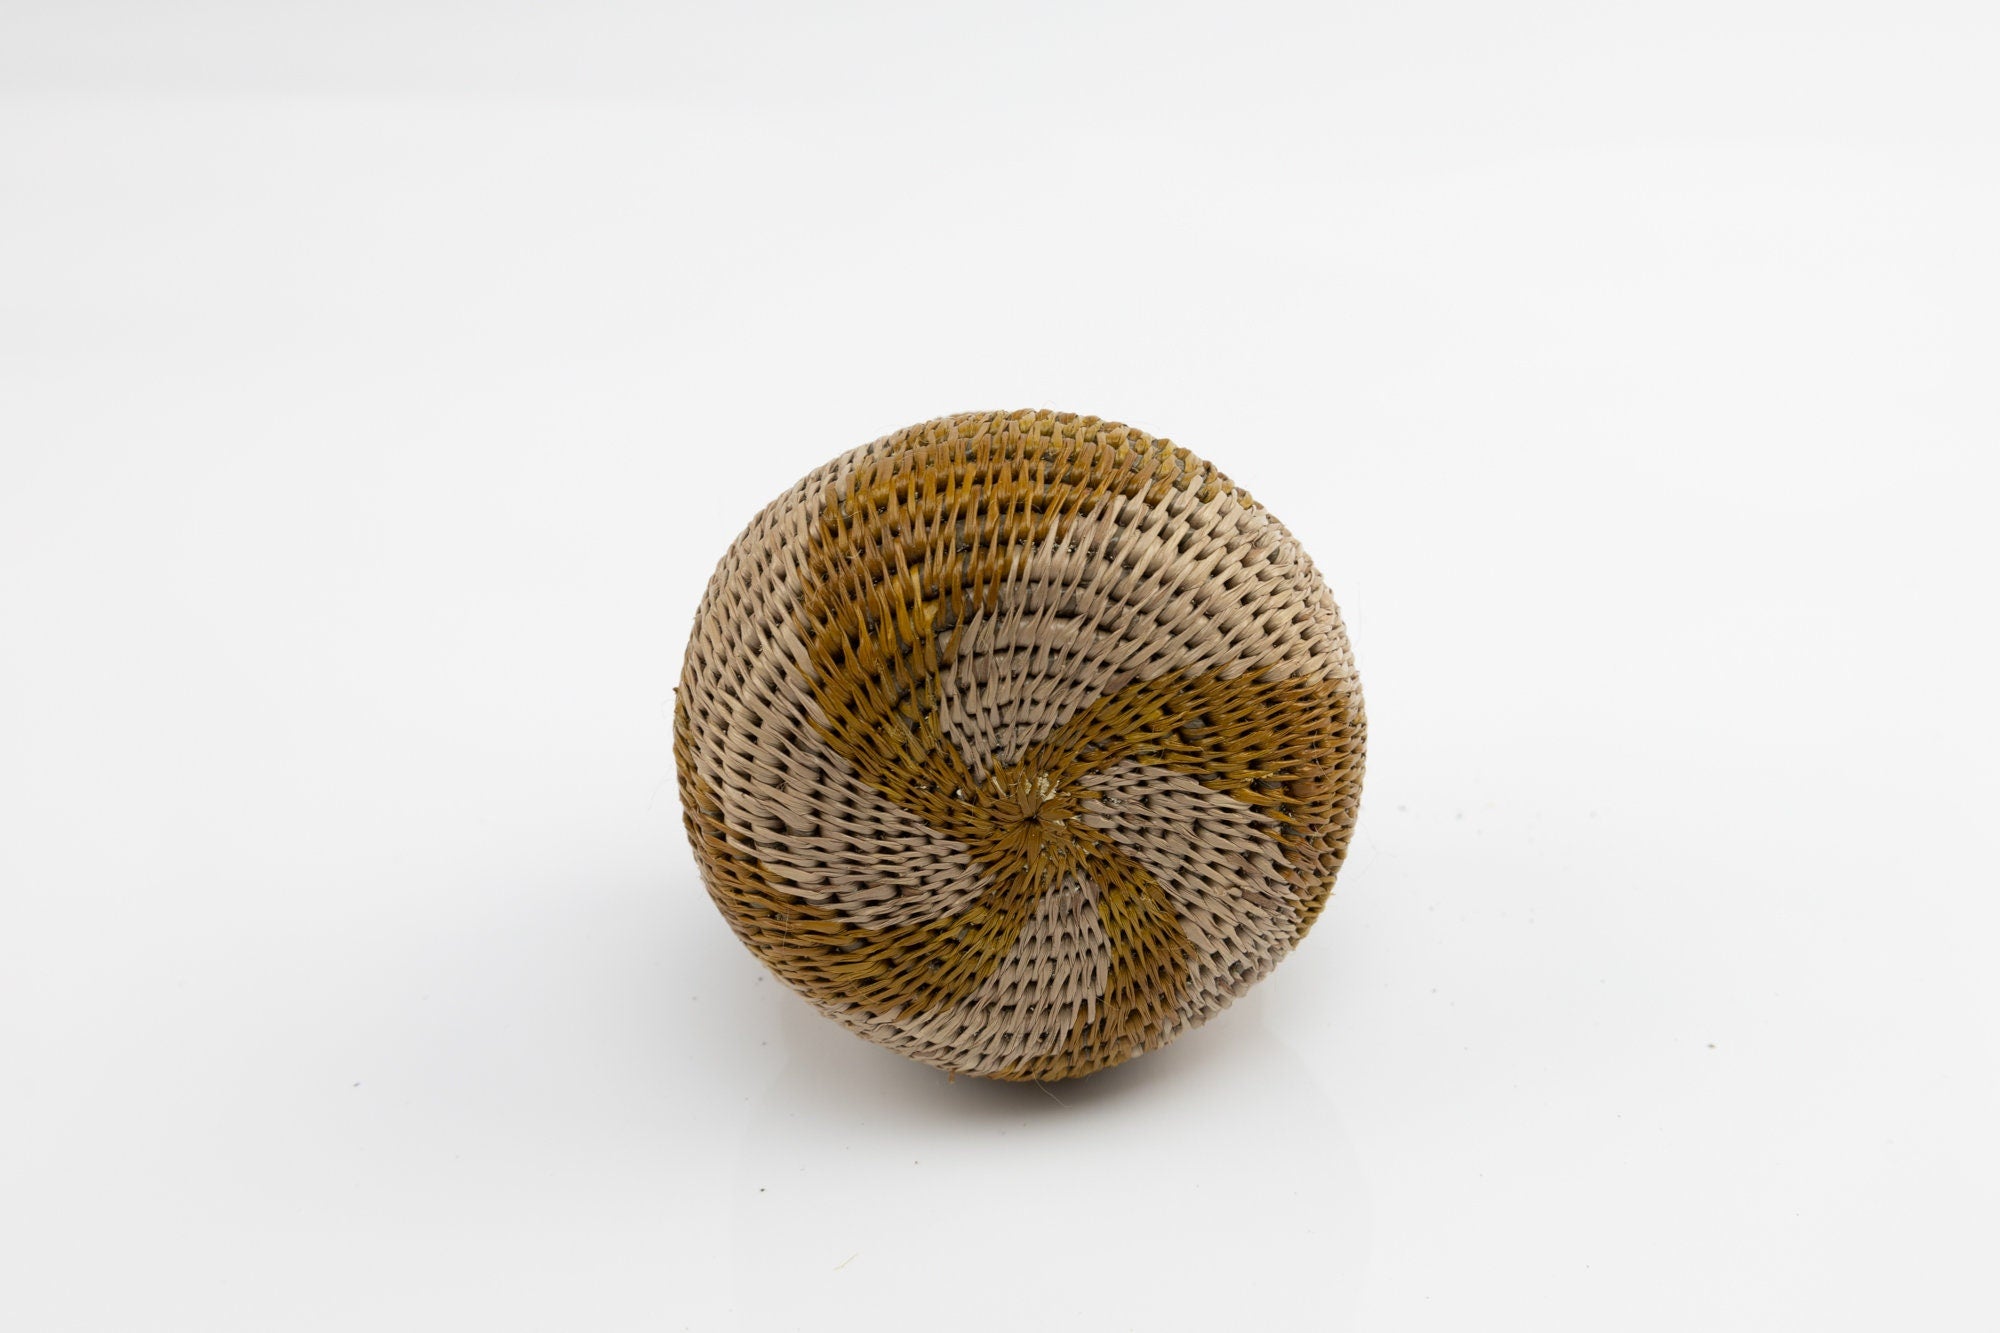 Hand Woven Small Basket Made By Wounaan And Emberá Panama Indians. Bowl Basket, Woven Basket, Basket Decor, Woven Storage